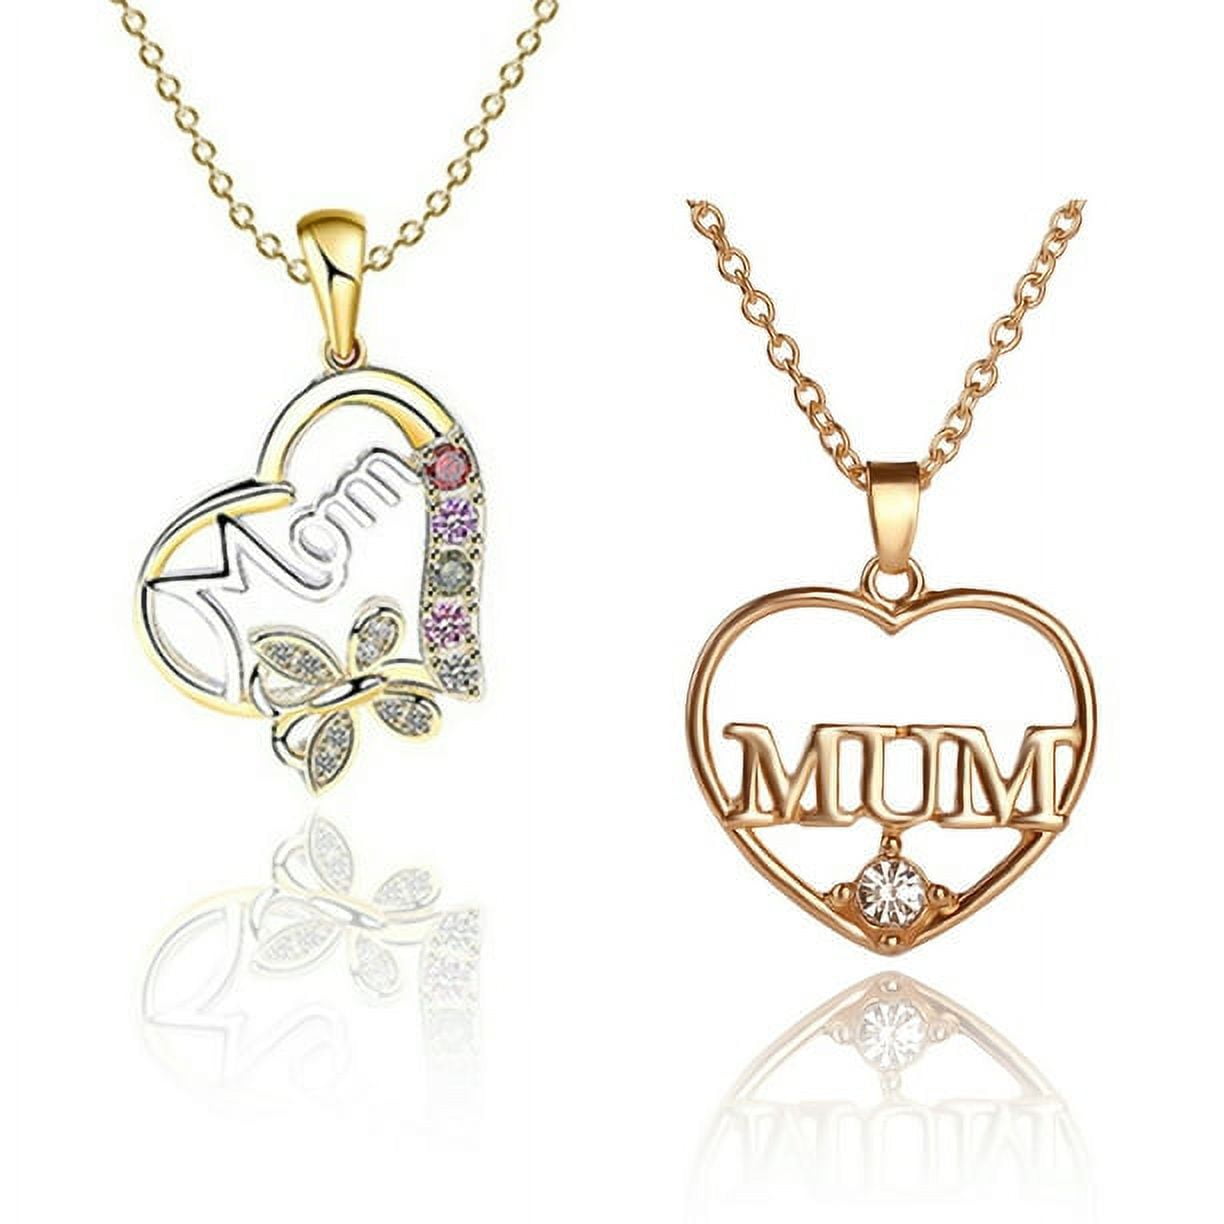 SHIYAO Best Gifts for Women 2PCS Mom Necklace Birthday Mothers Day Jewelry Gifts for Mom Grandma Wife from Daughter Son Love Heart 154af052 5313 4821 bbc5 a323ebefe3ab.a1107c3f1d1bc0984783c9ffbc675931